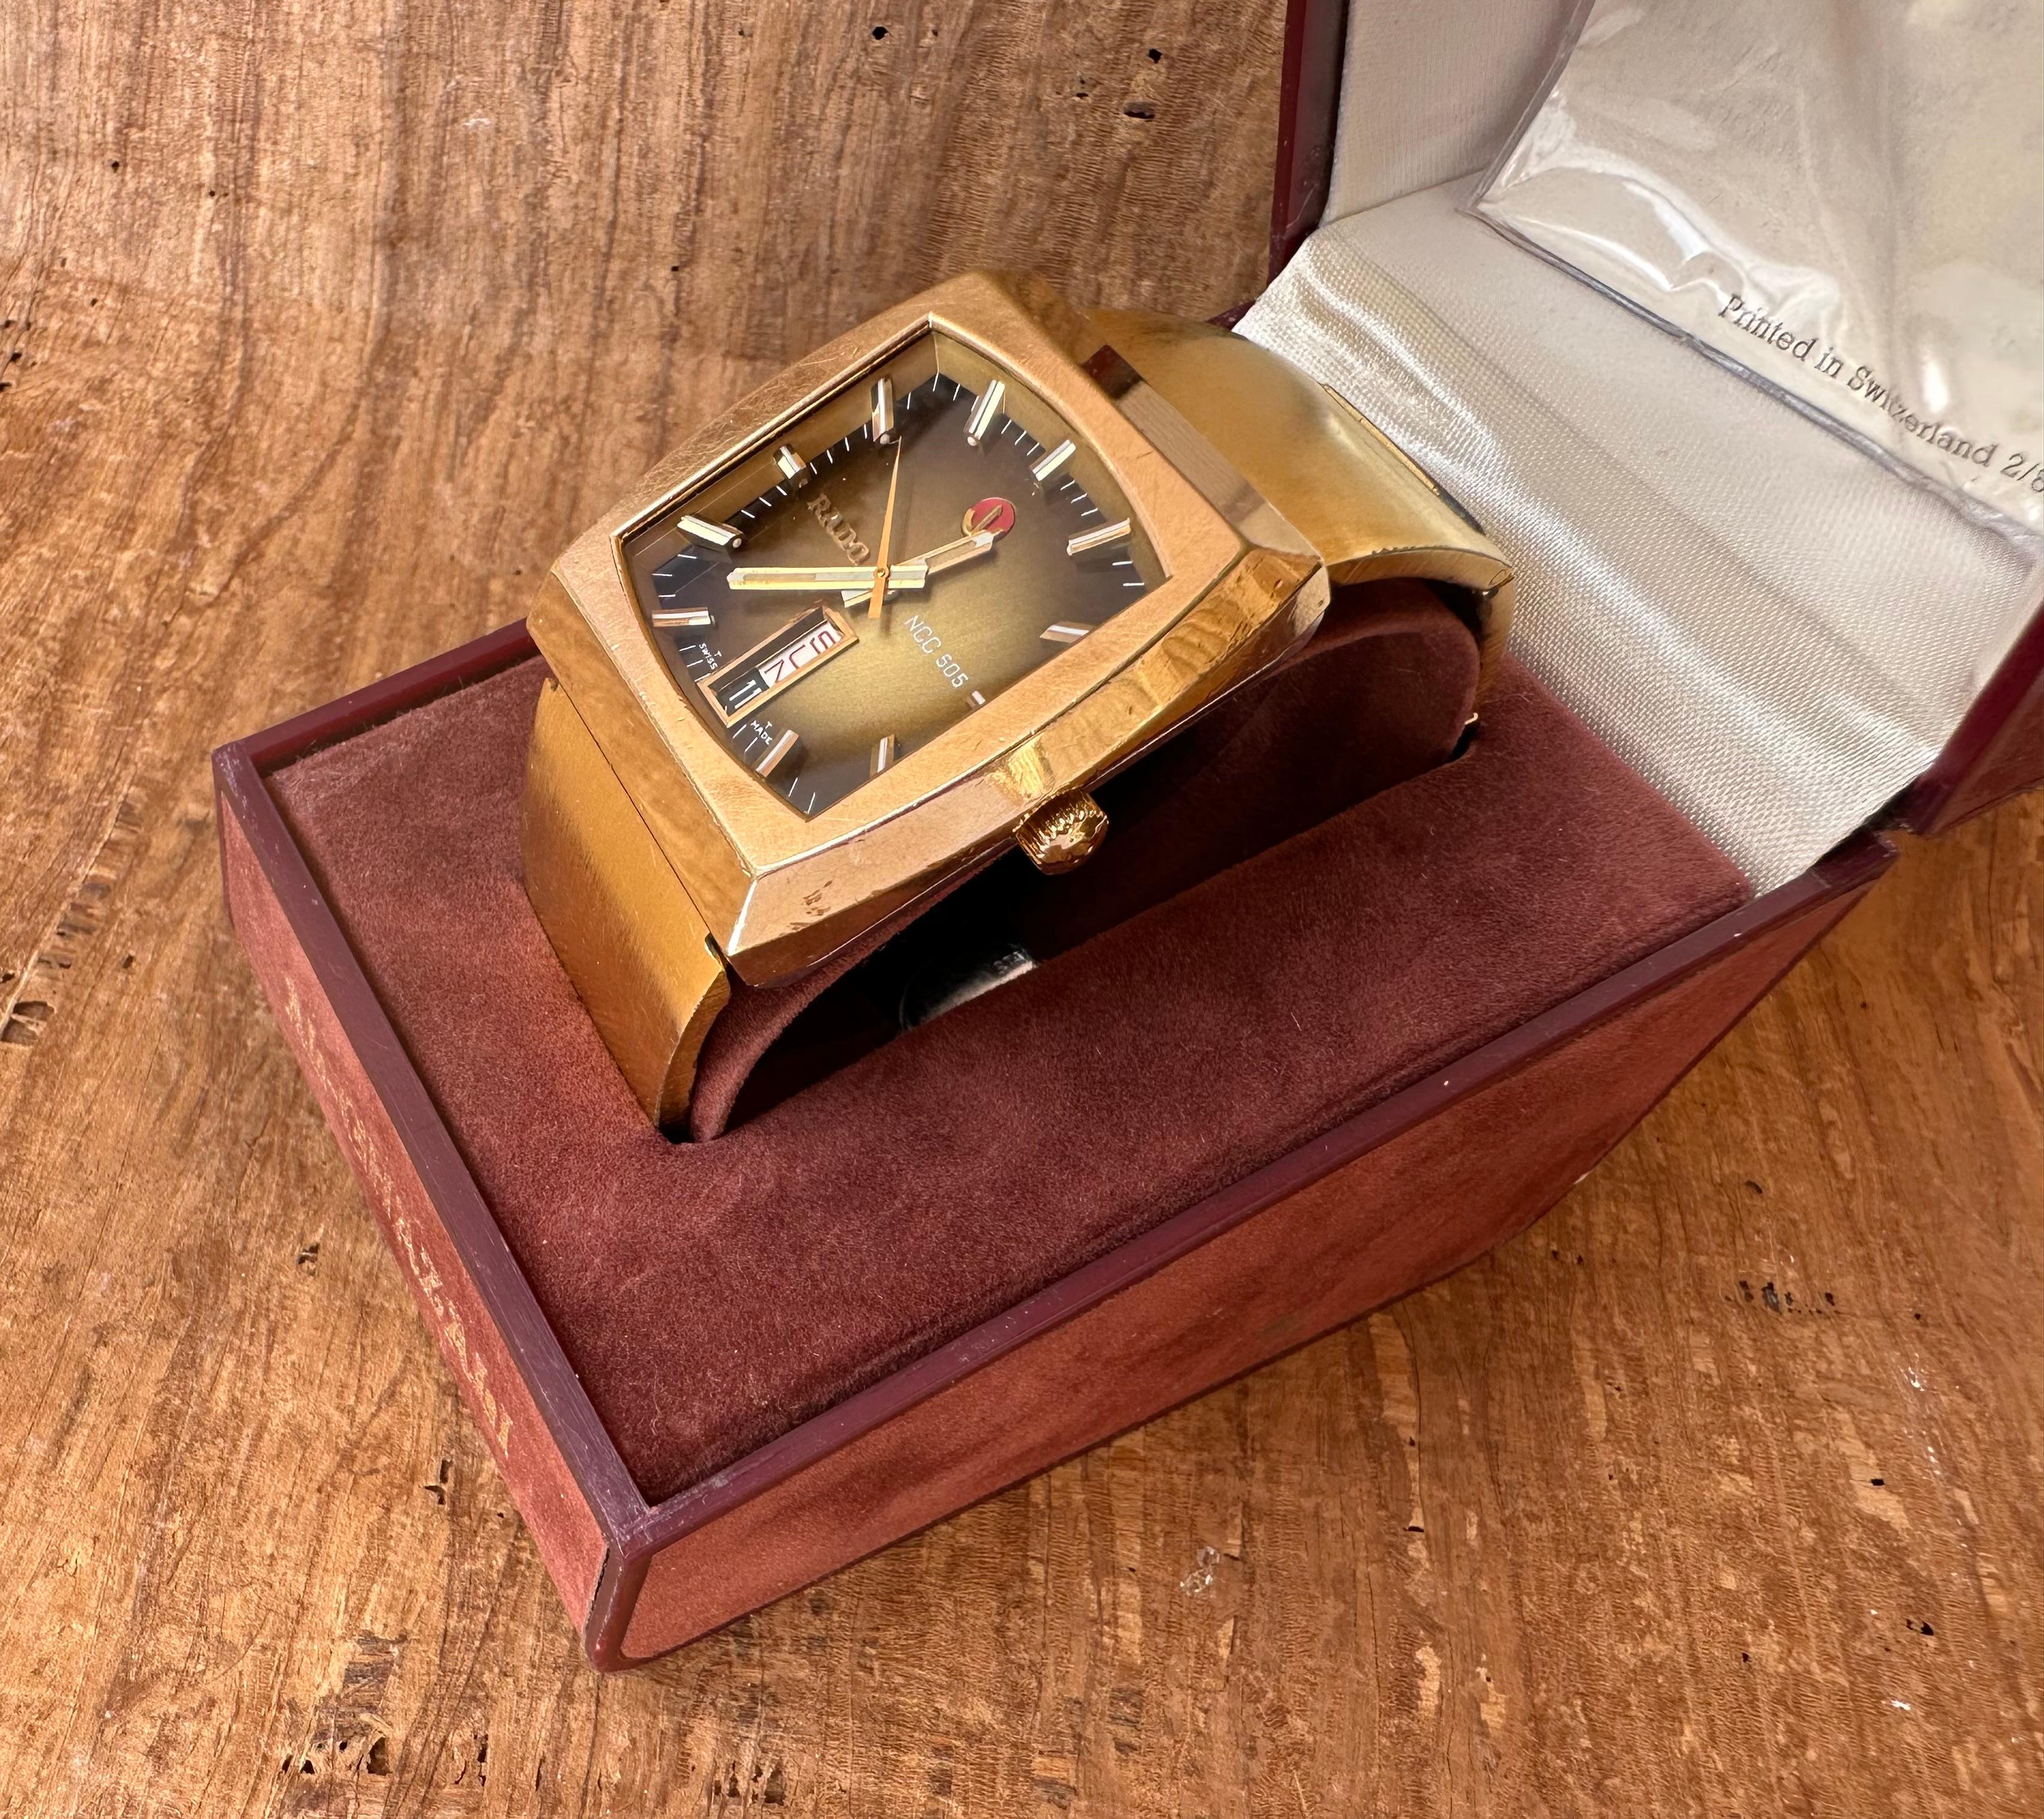 Rado Ncc 505 Automatic Gold Plated Rare Dial Boxed For Sale 1